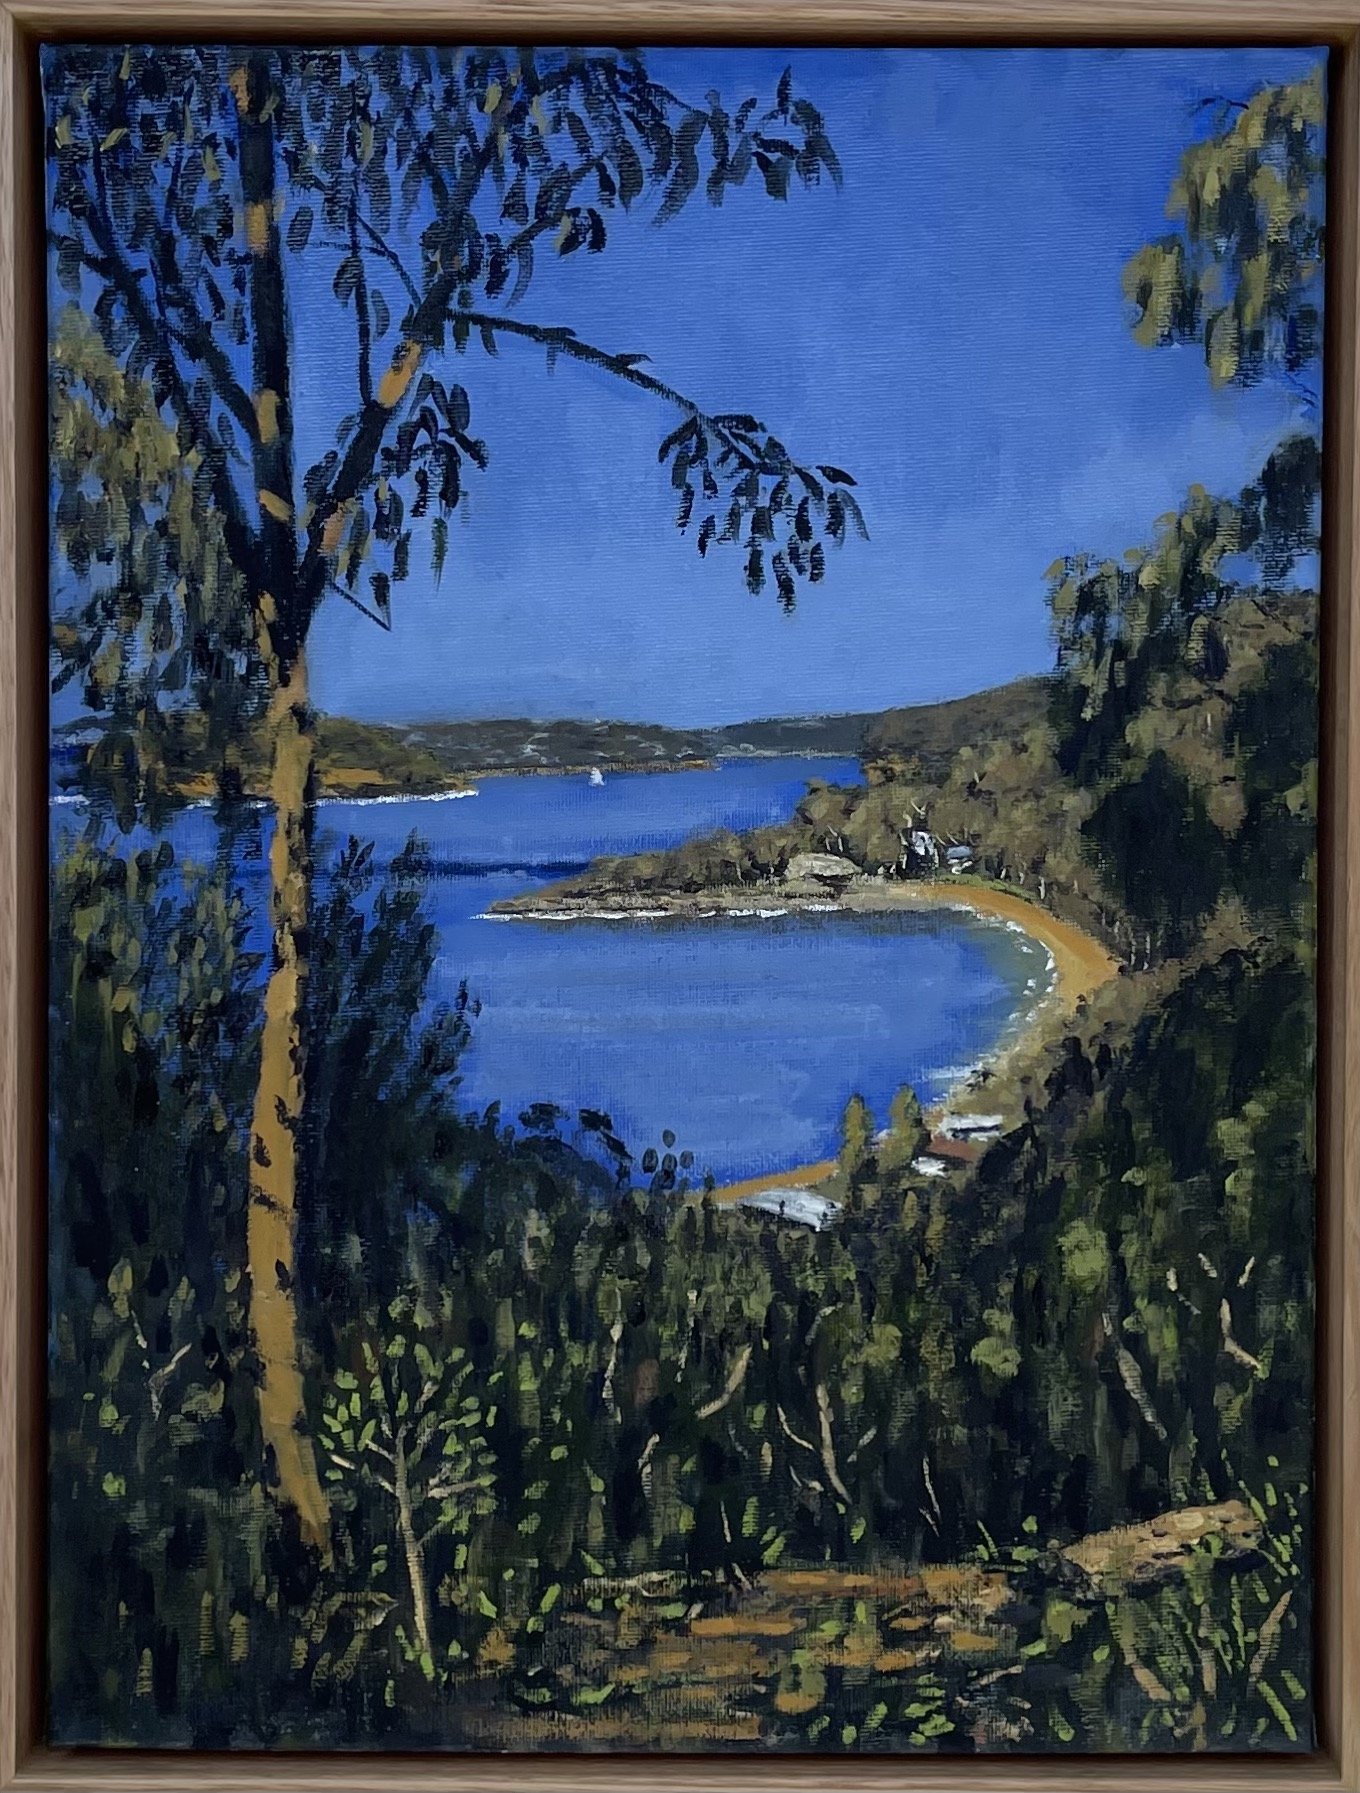 MAX LETHEM View From Mt Ettalong 31x41cm framed oil on canvas WAS $950 now $700